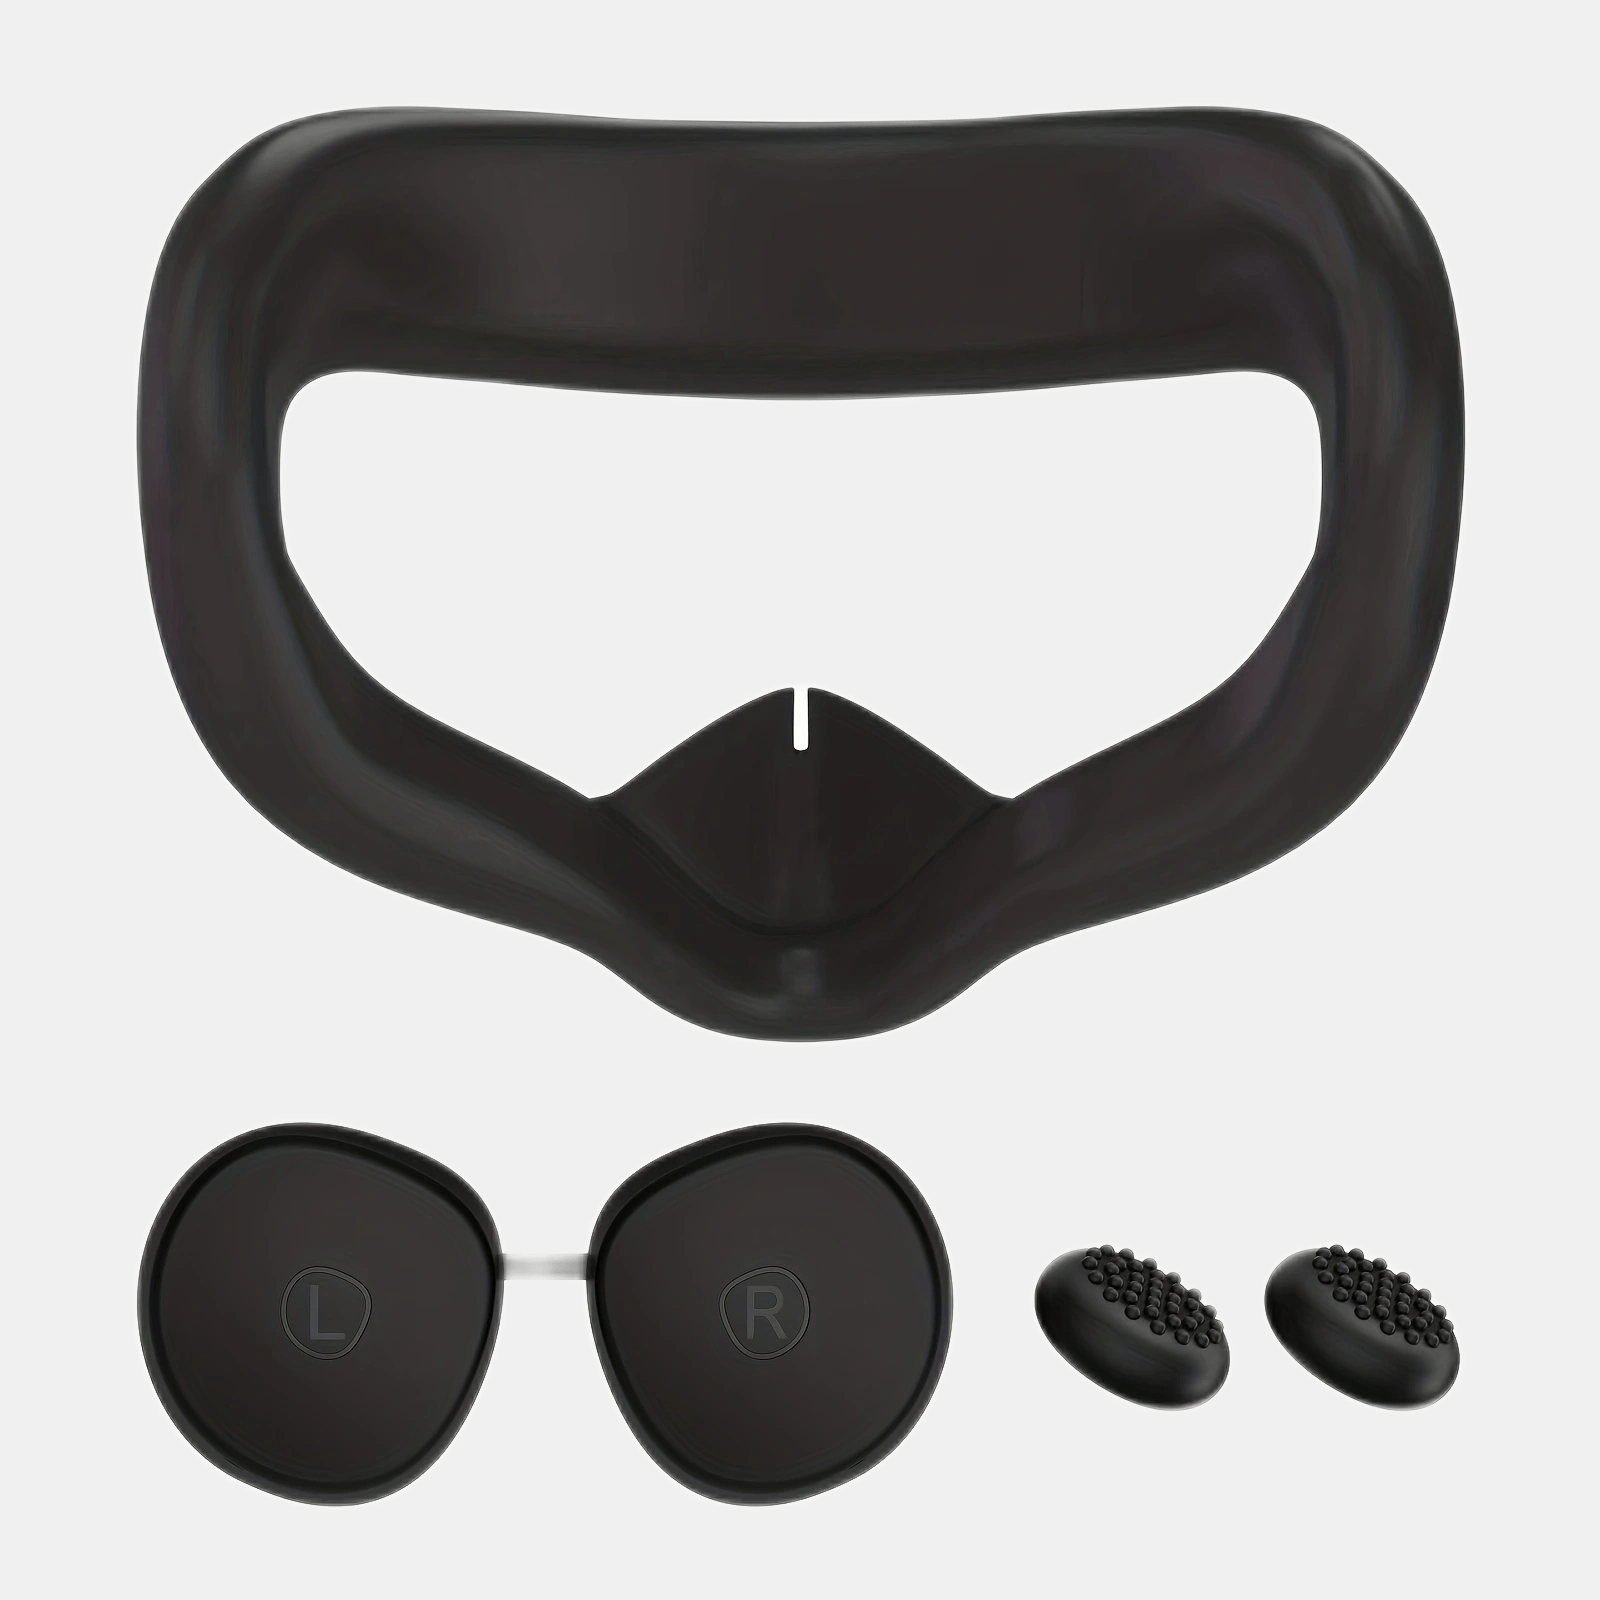 For Oculus Quest 2 Accessories, Accessory Set for Meta Quest 2, Include  Silicone Face Cover, Controller Grip Cover, VR Shell Cover, Lens Cover 